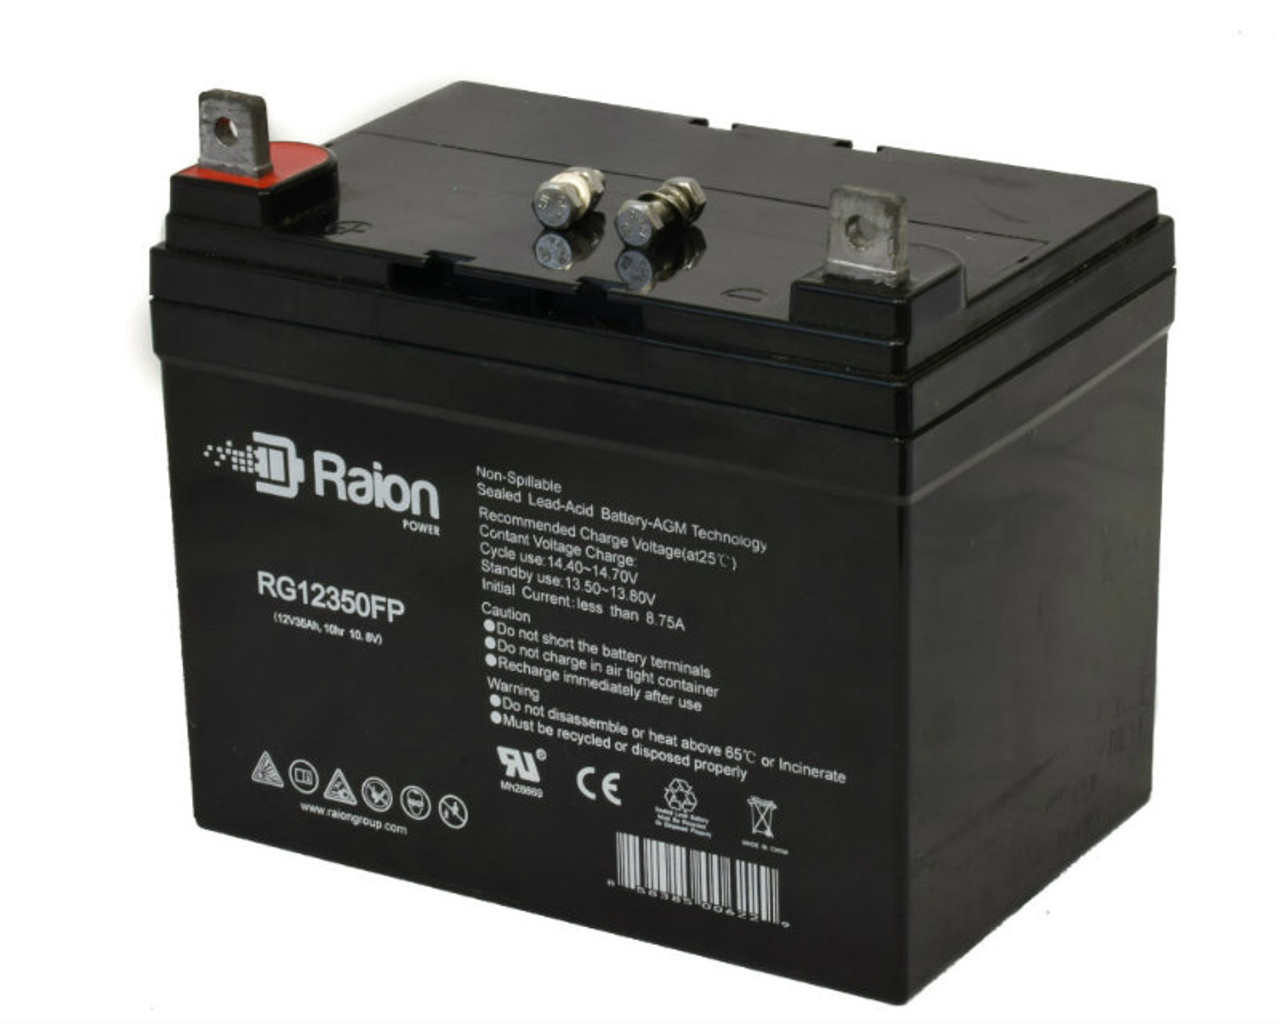 Raion Power Replacement 12V 35Ah RG12350FP Battery for Lawn Boy 9368ES